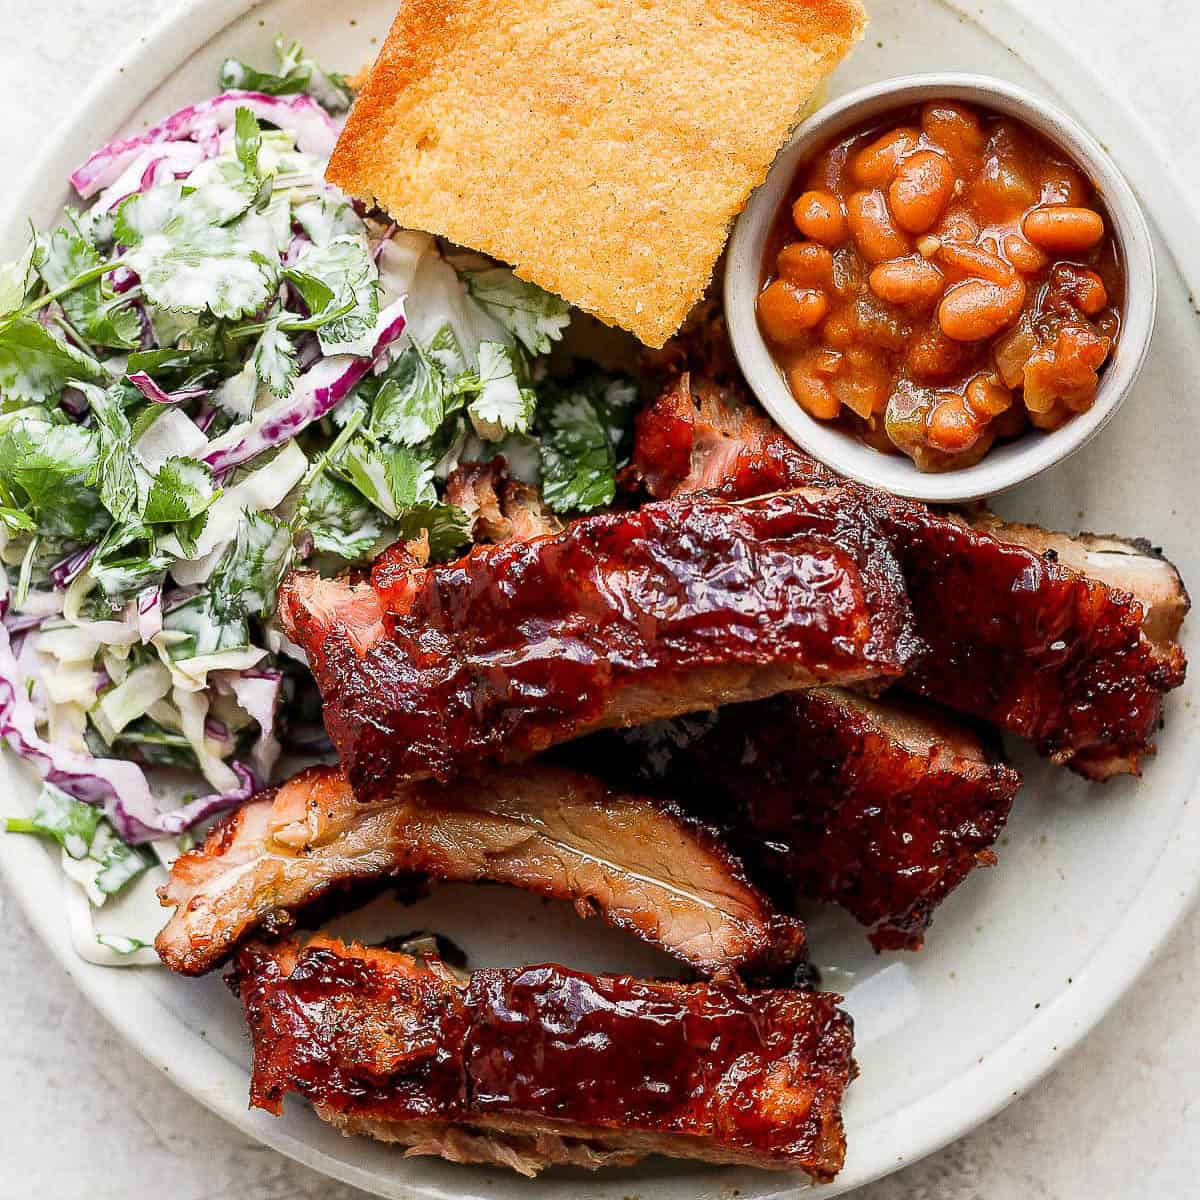 https://thewoodenskillet.com/wp-content/uploads/2021/04/smoked-baby-back-ribs-recipe-1.jpg